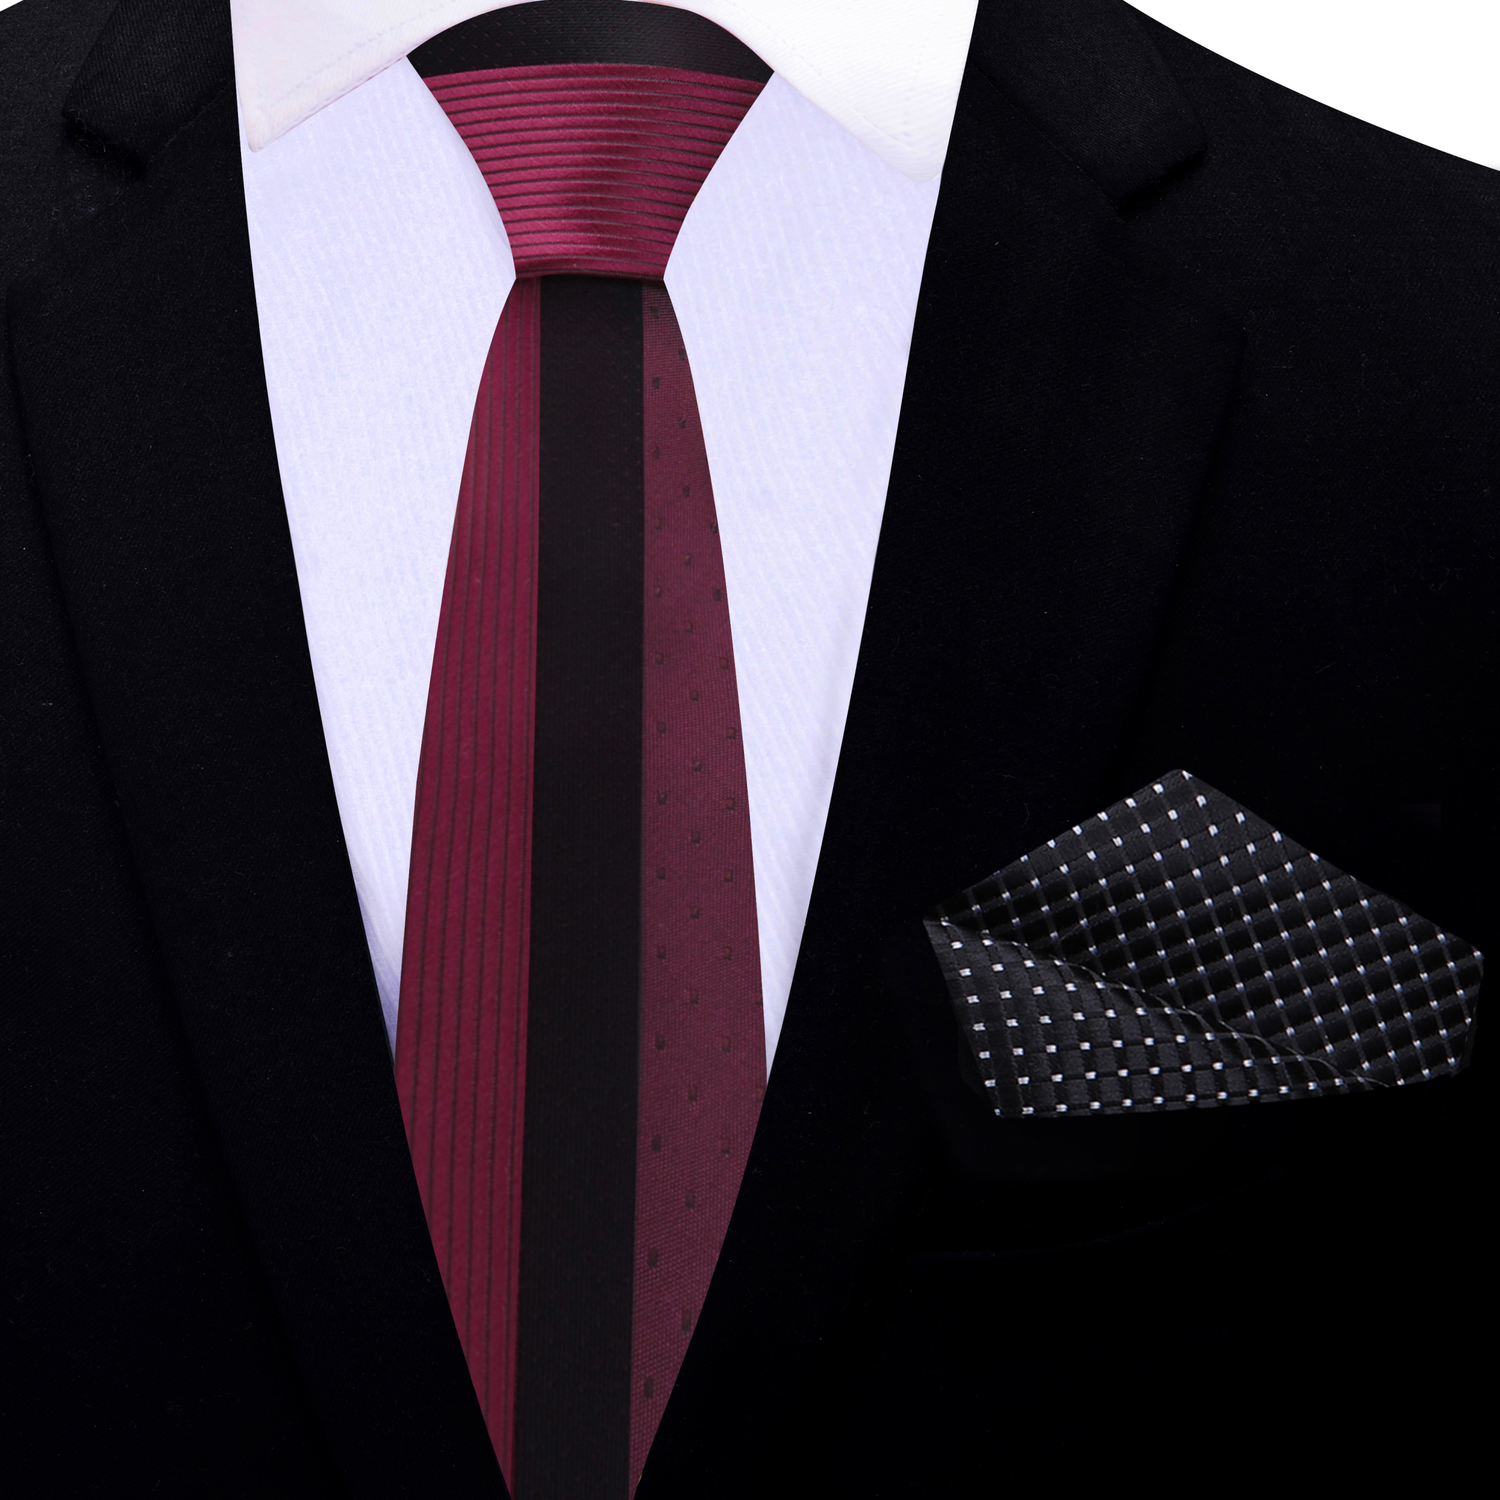 Thin Tie: Burgundy and Black Lined Necktie and Black Square